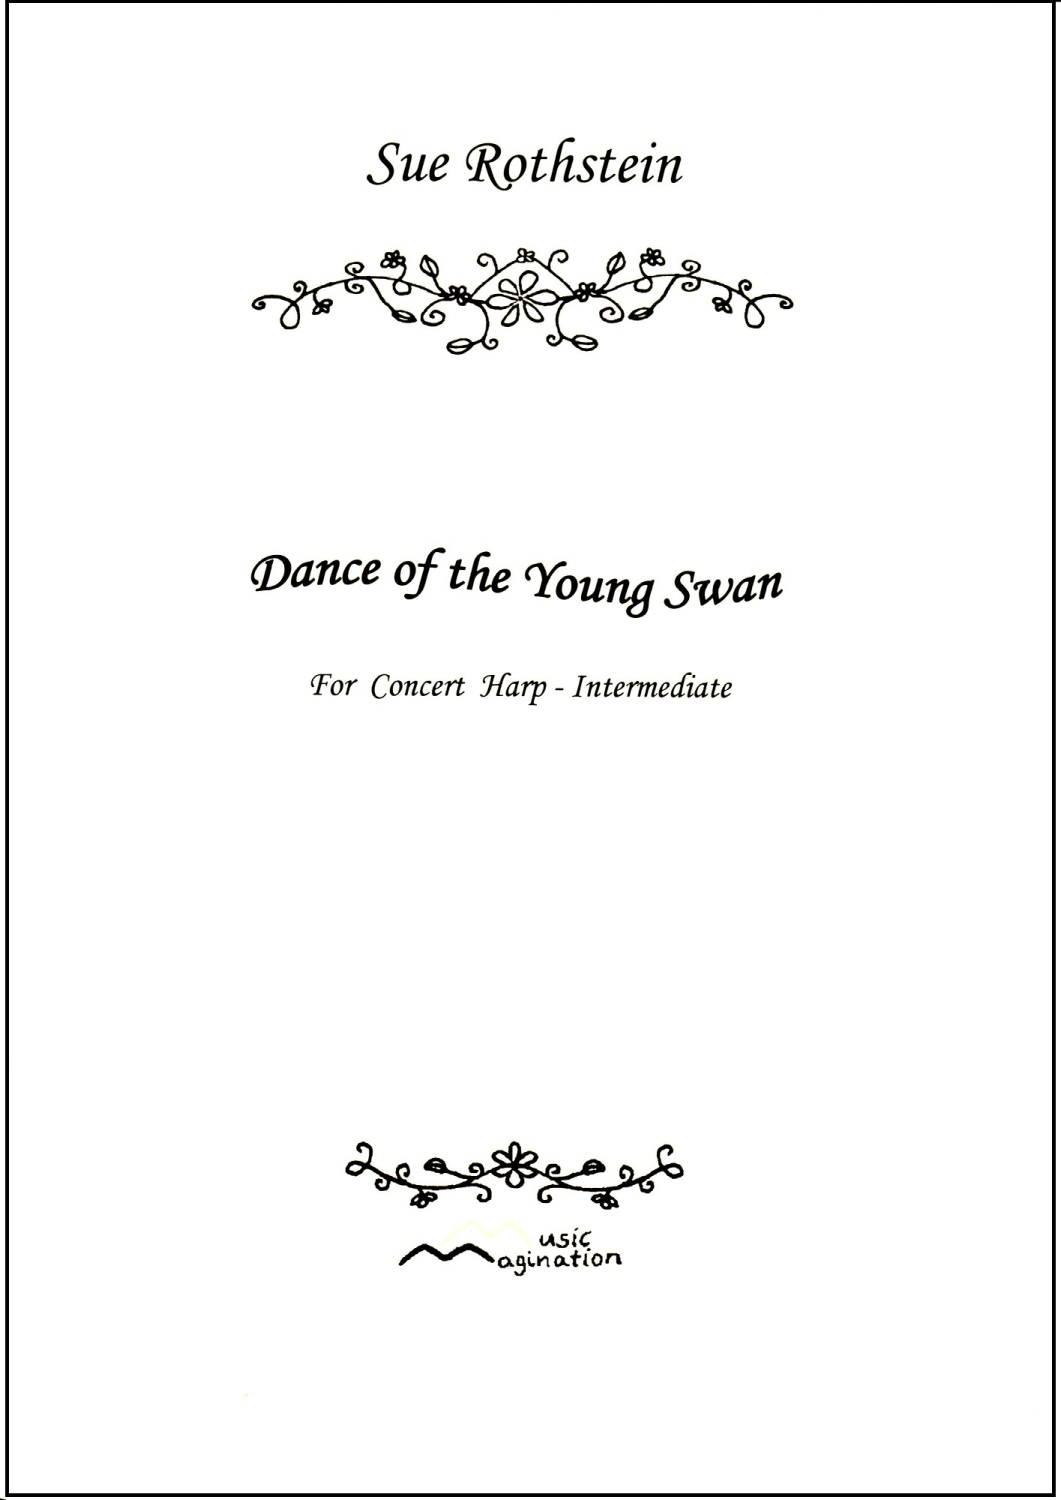 Dance of the Young Swan - Sue Rothstein